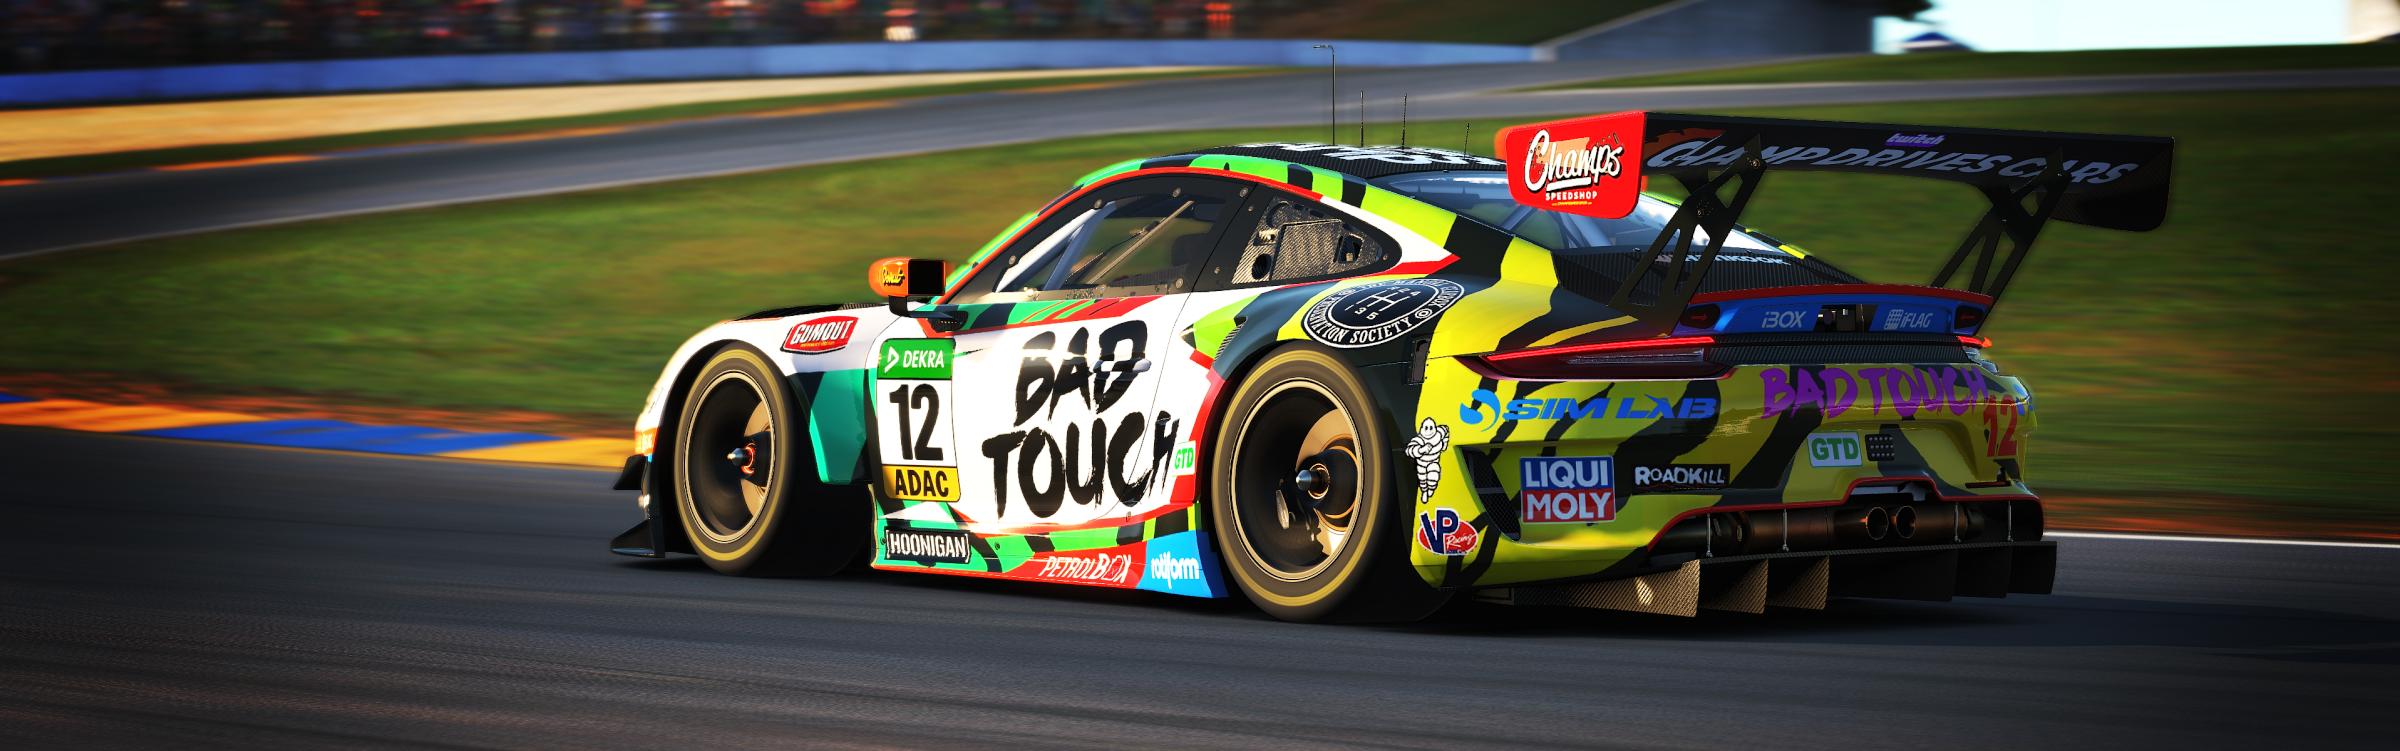 Preview of Team Bad Touch Porsche 911 GT3 R by Chris Champeau